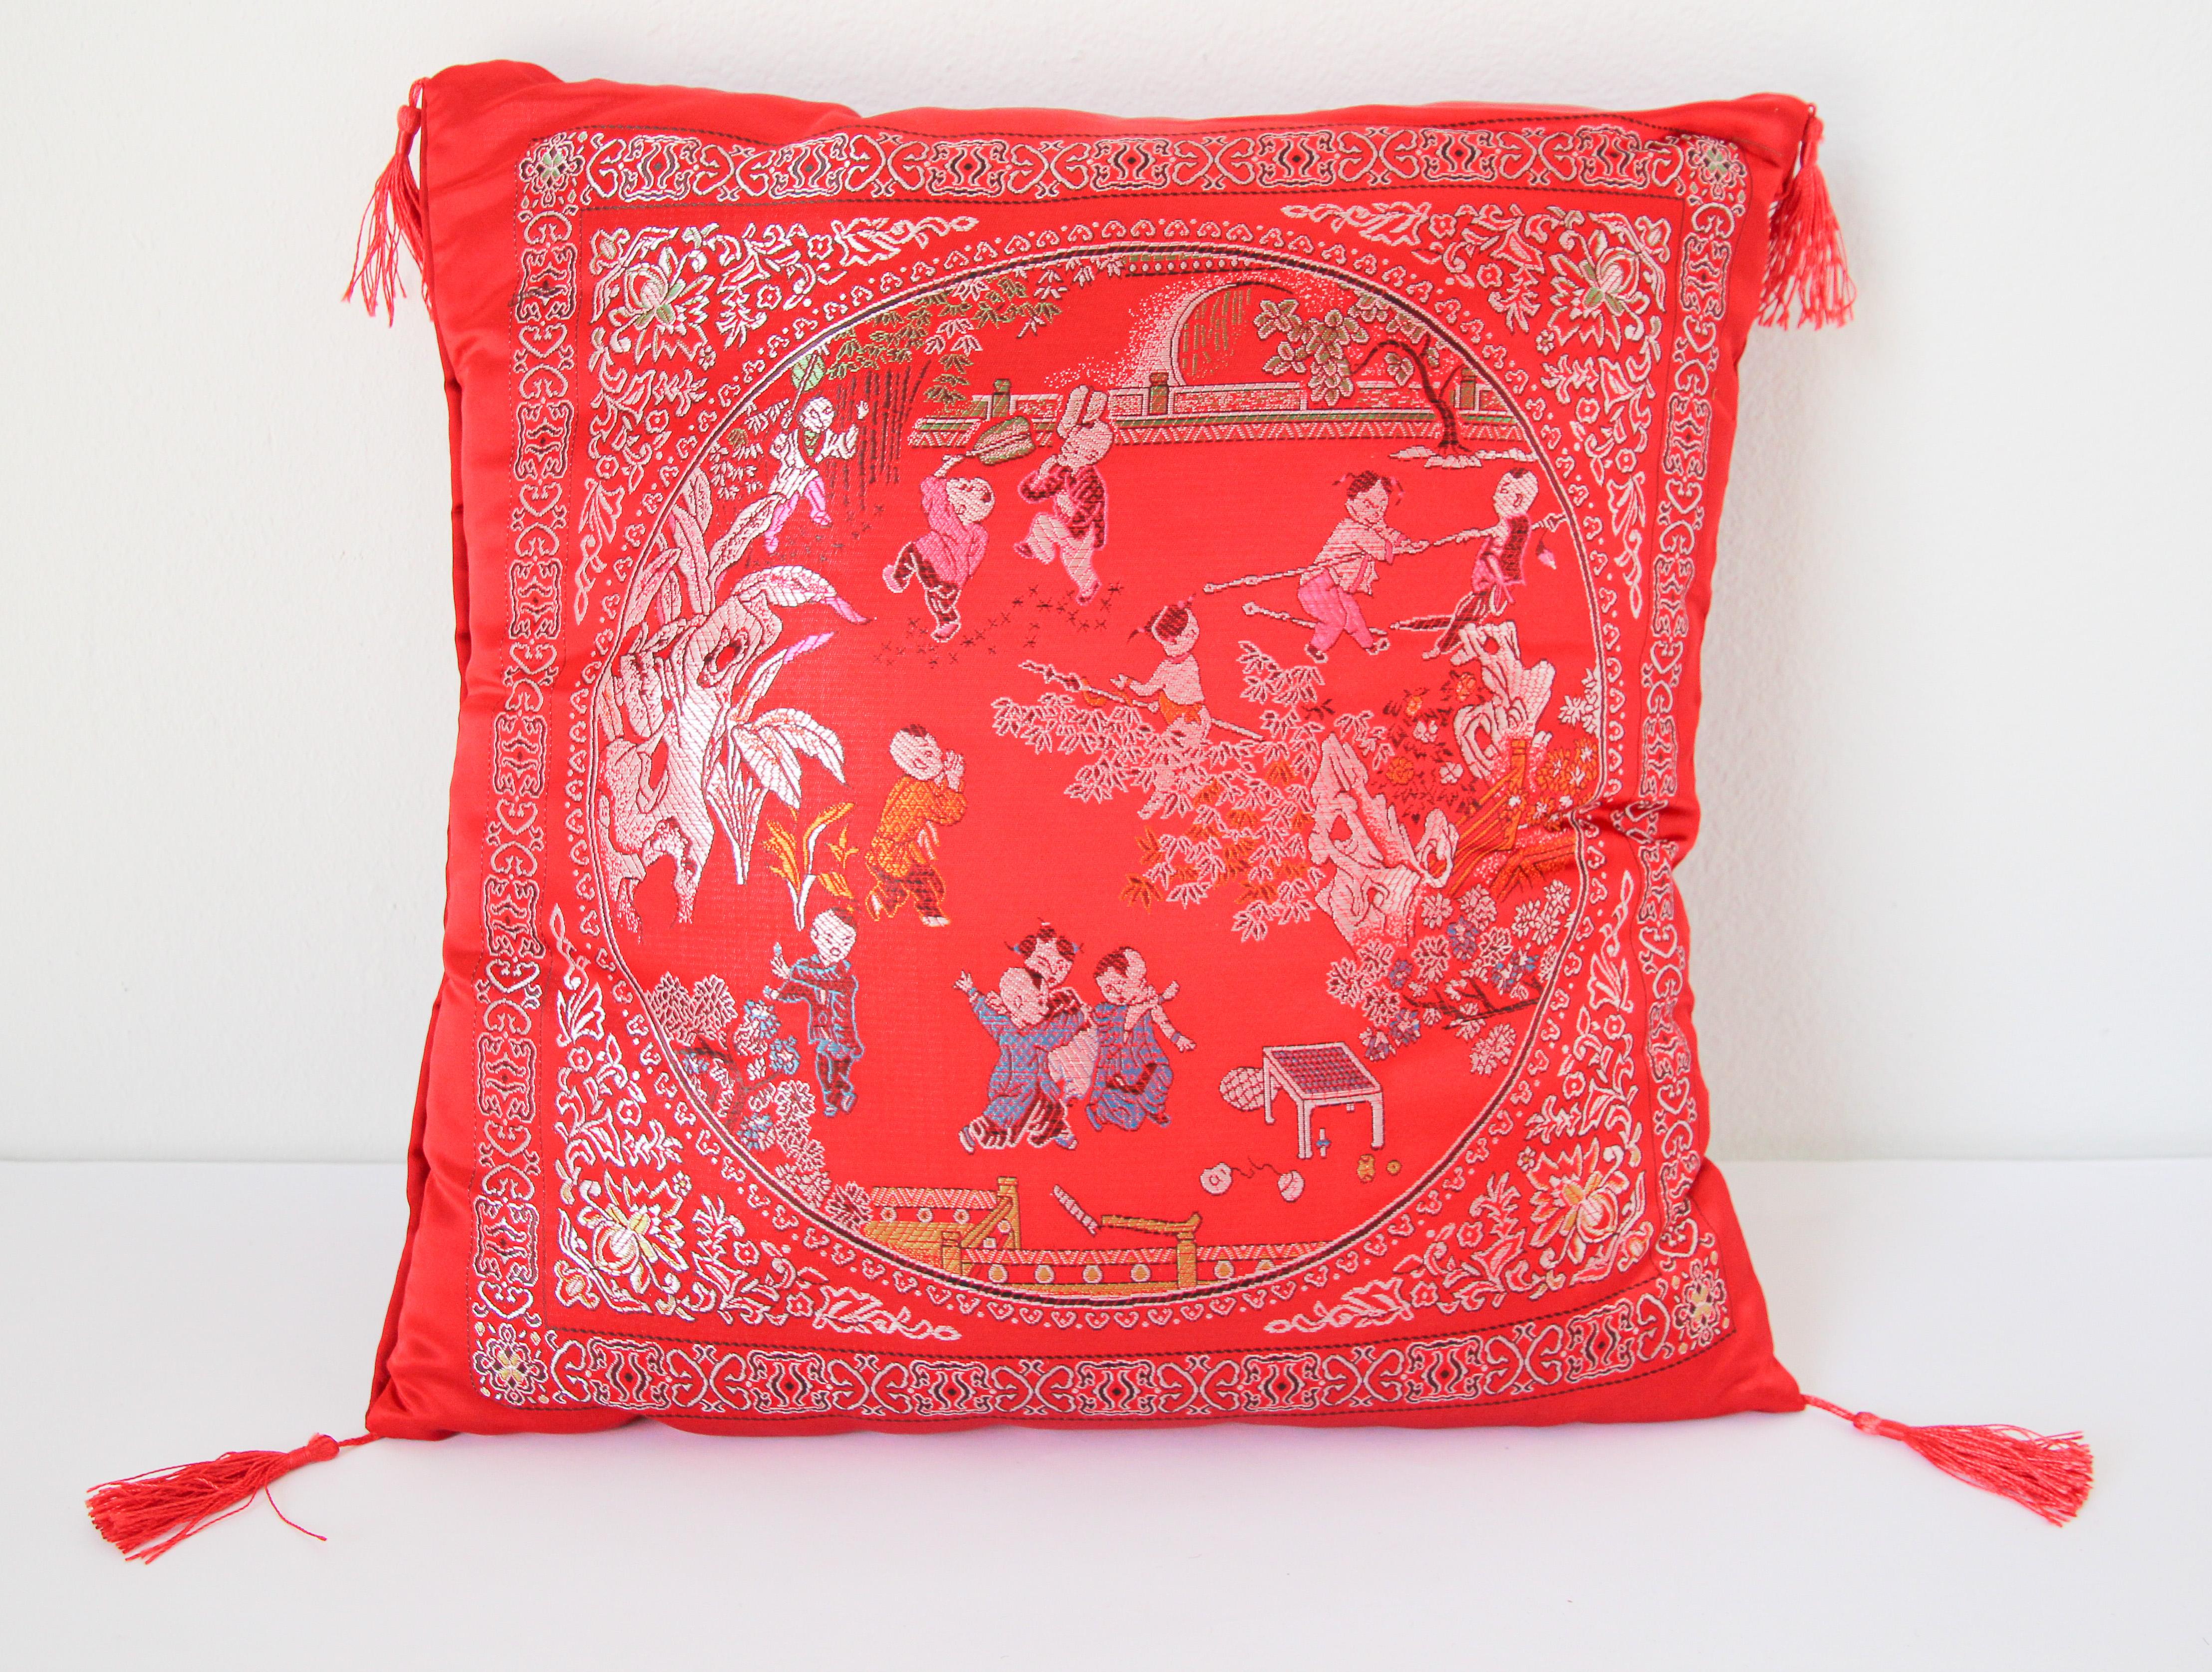 Asian decorative throw pillow with fringes and red tassels.
Luxury silk in red with scene of kids playing outdoor in traditional Chinese costumes.